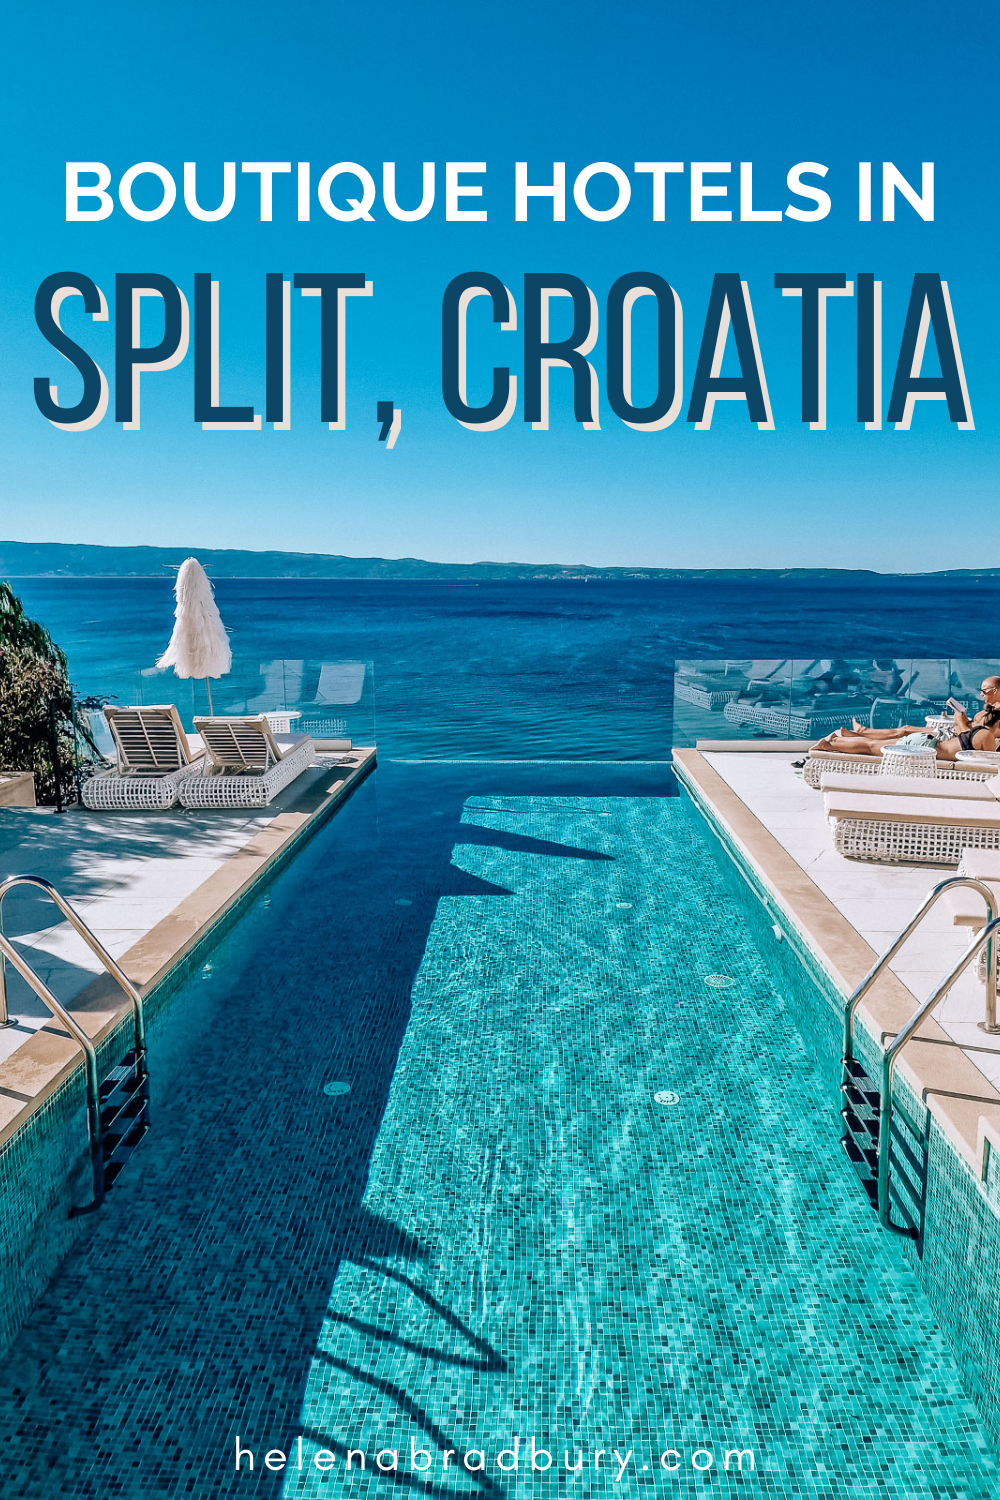 Wondering where to stay in Split, Croatia? These boutique hotels in Split are some of the best I’ve ever stayed in and are sure to make your trip memorable! | where is the best place to stay in split | best boutique hotels split croatia | top hotel s